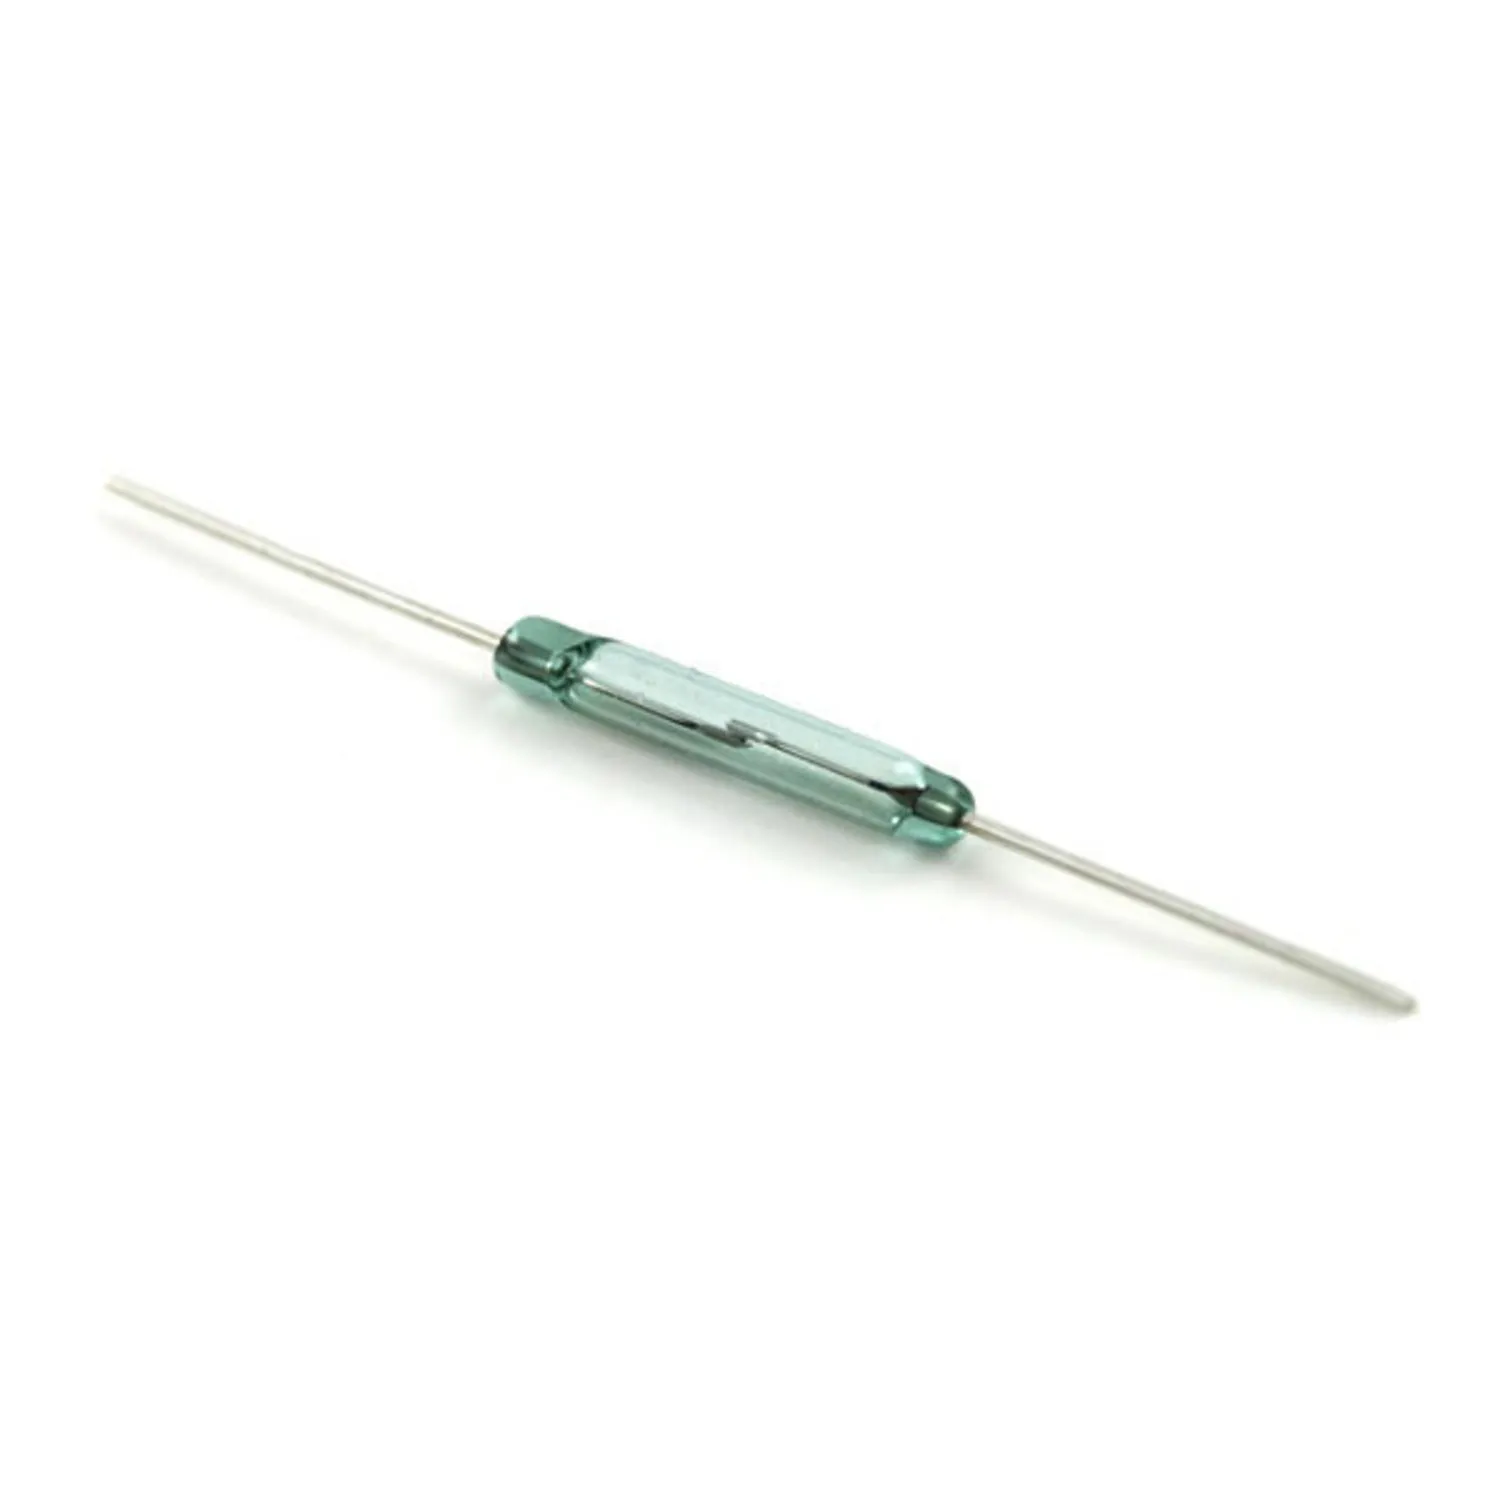 Photo of Reed Switch